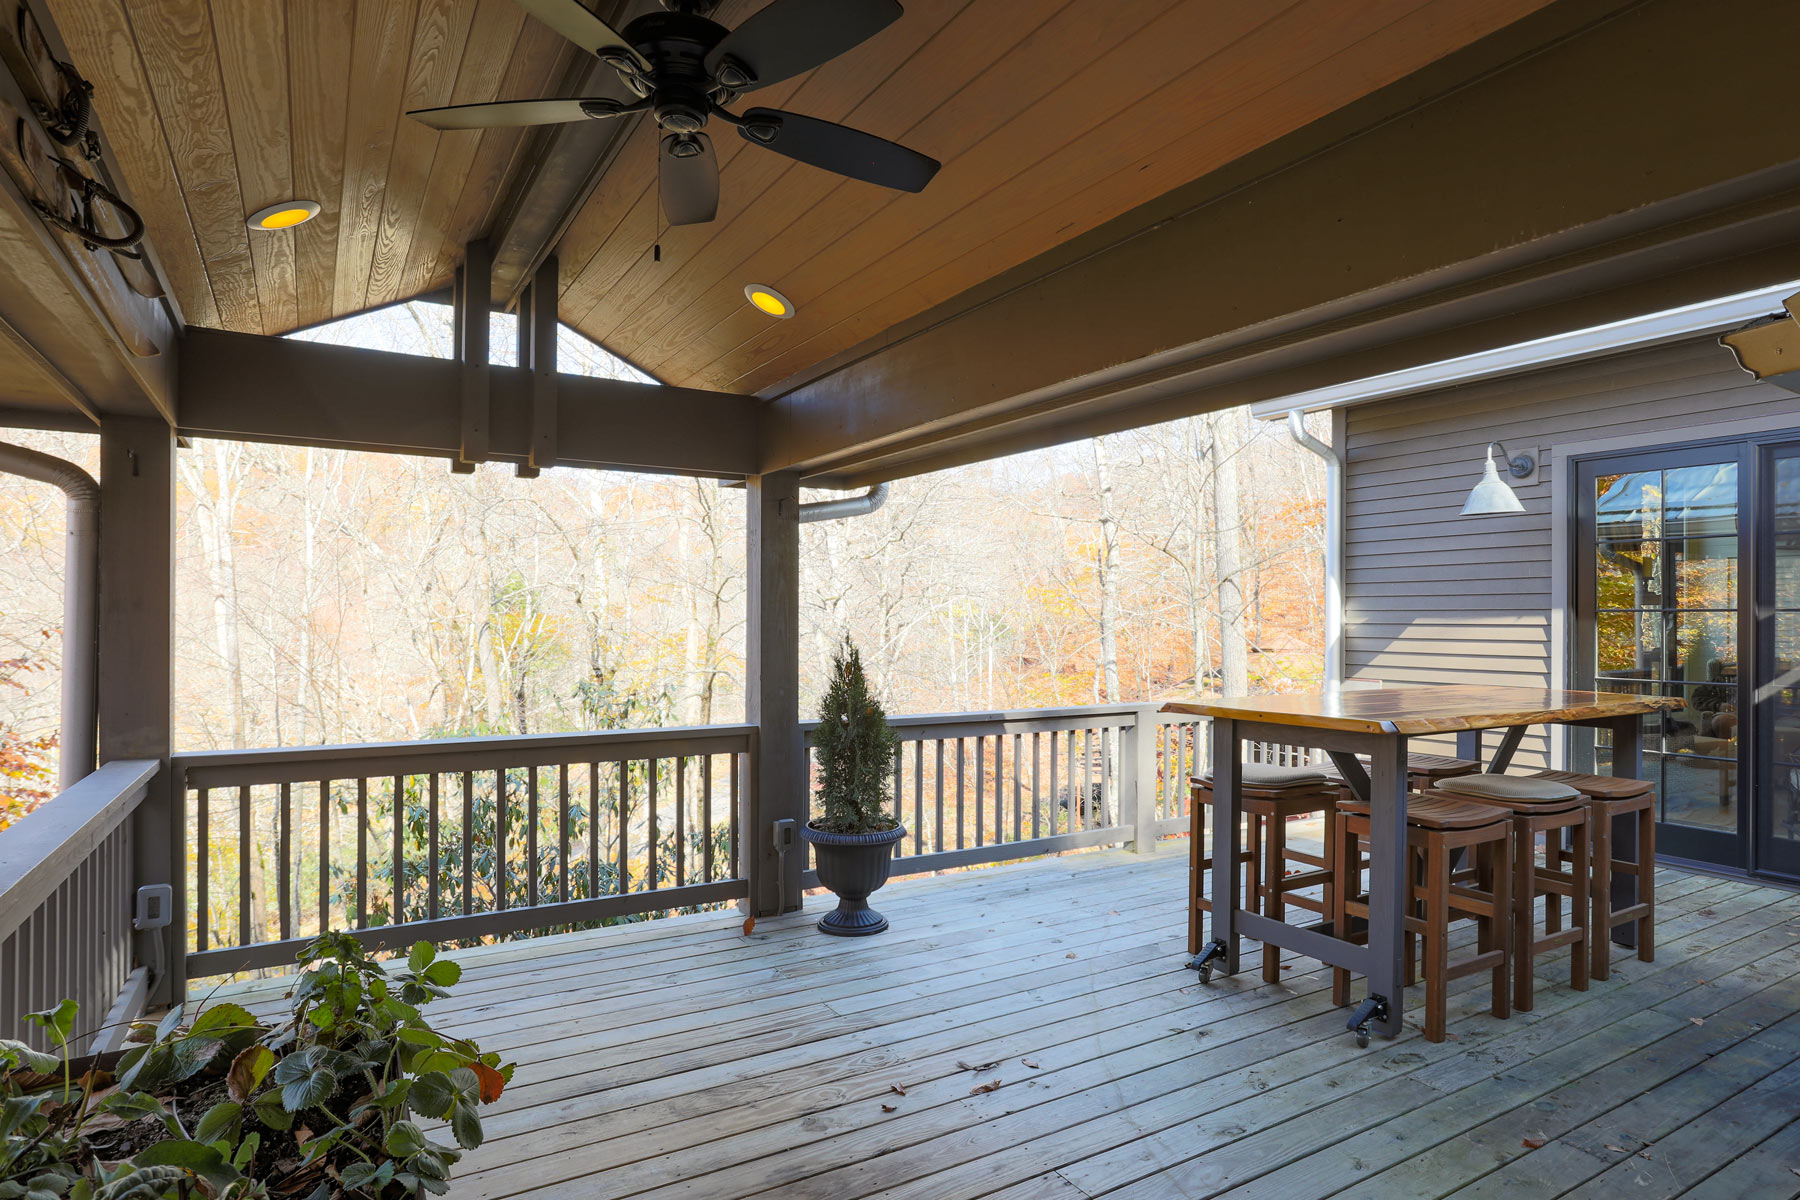 Covered bbq area on back deck